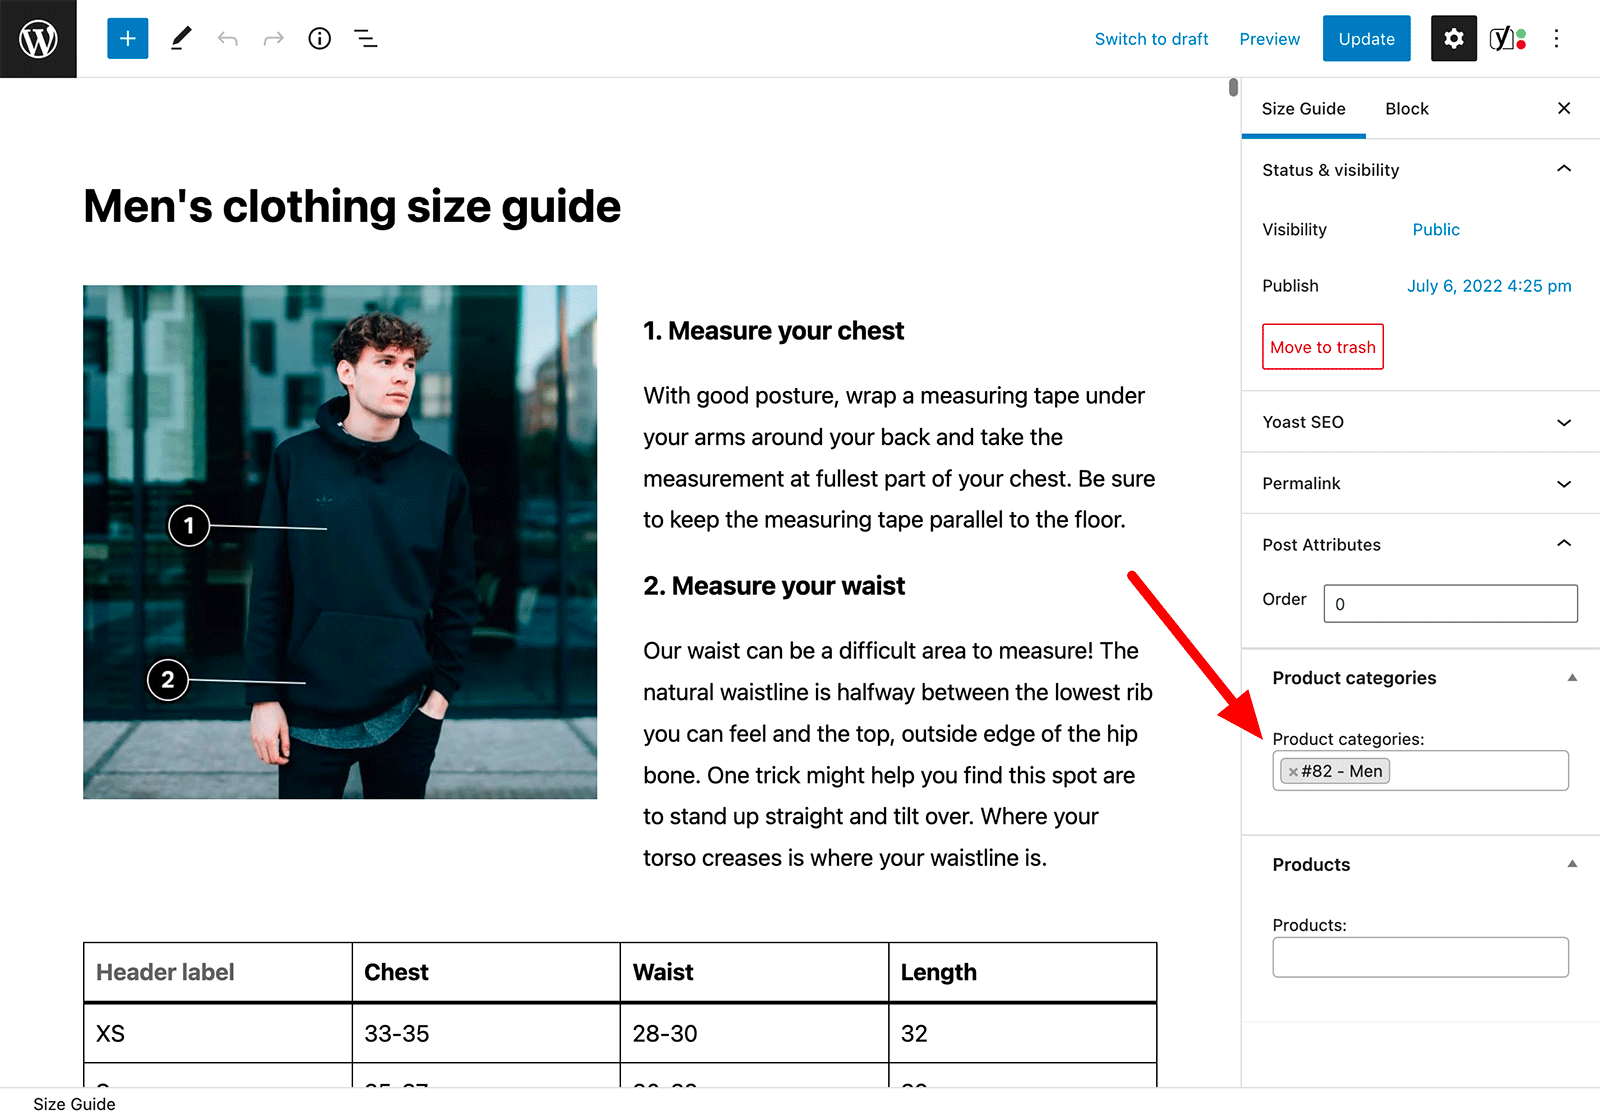 Size Guides Category Selection